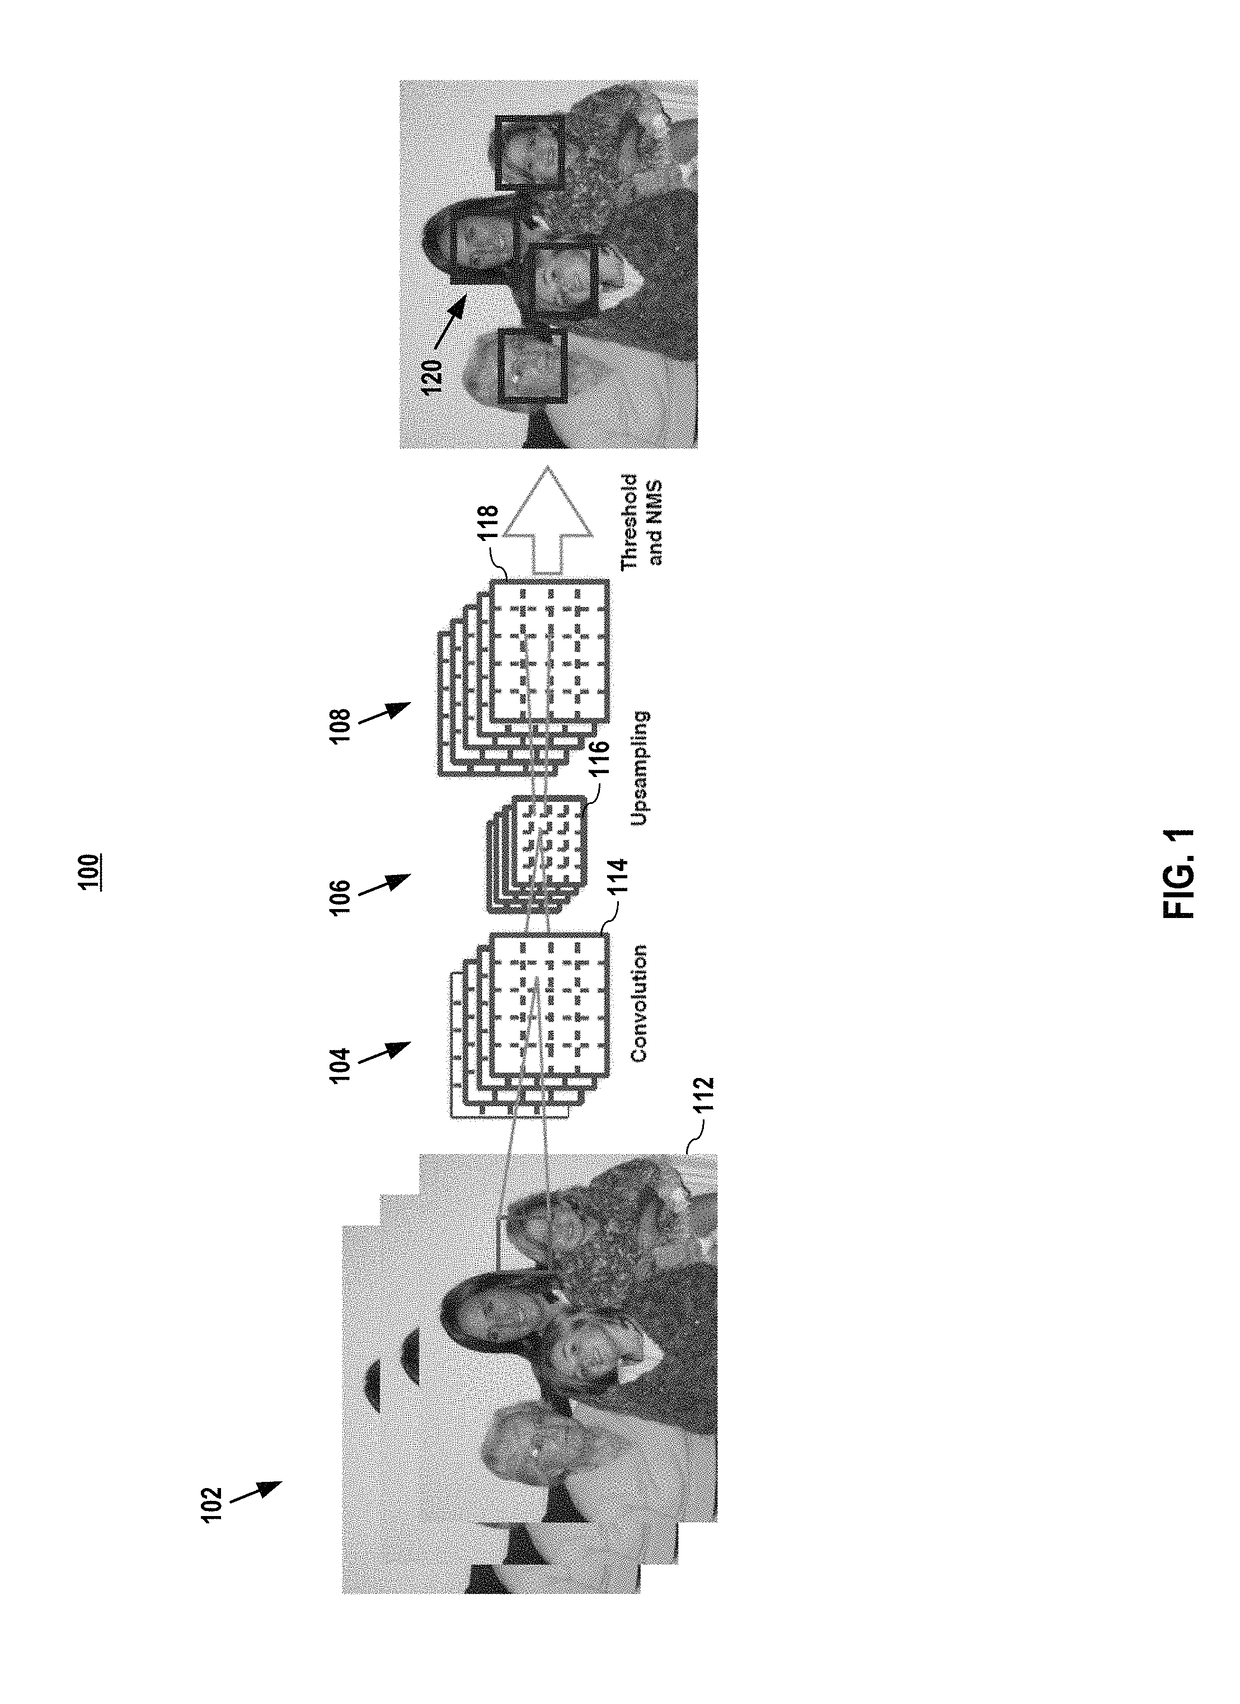 Systems and methods for end-to-end object detection